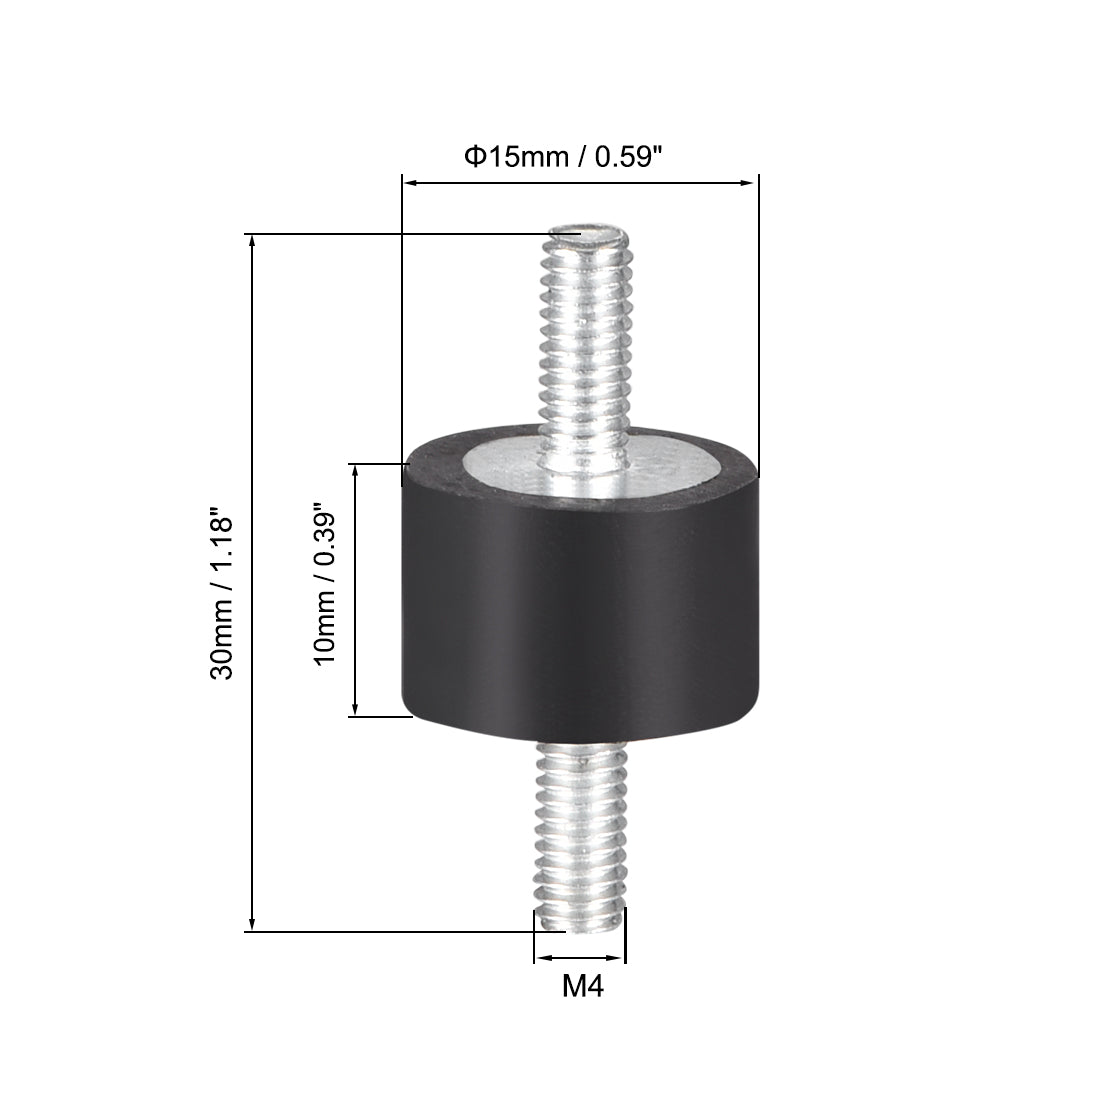 uxcell Uxcell Rubber Mounts,Vibration Isolators,with Studs